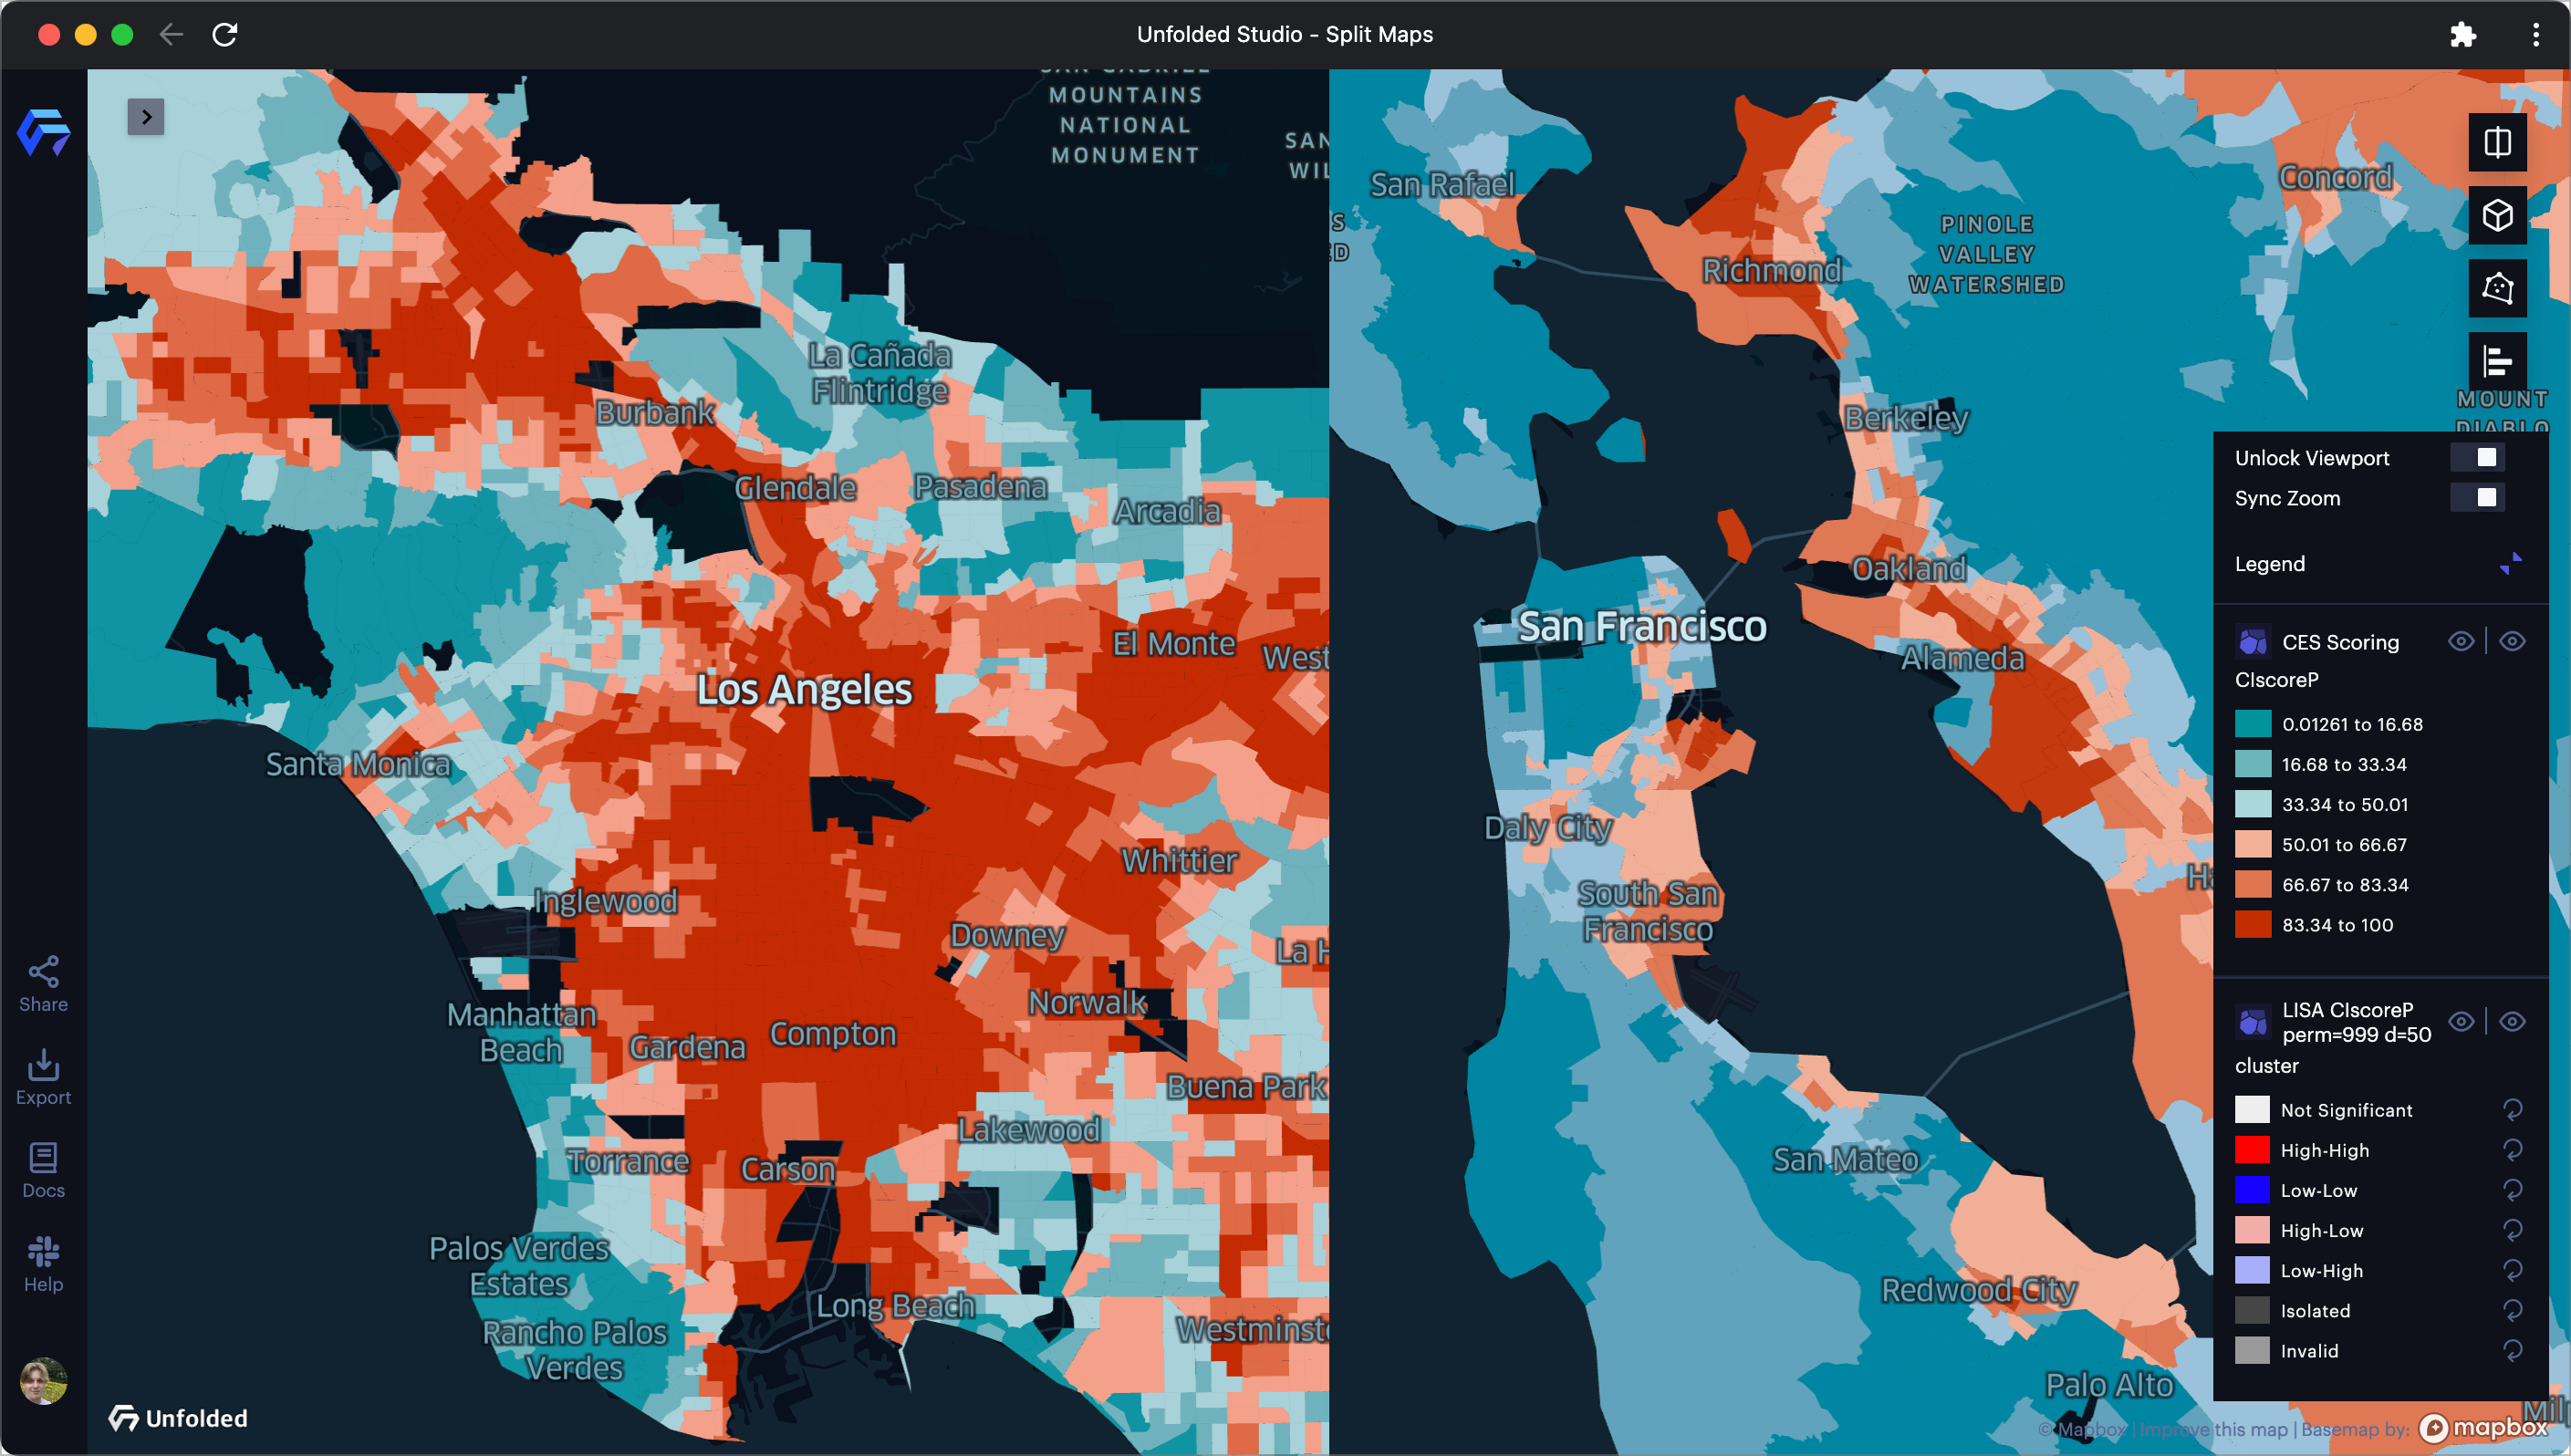 Comparing environment data in SF and LA using split maps with an unlocked viewport.